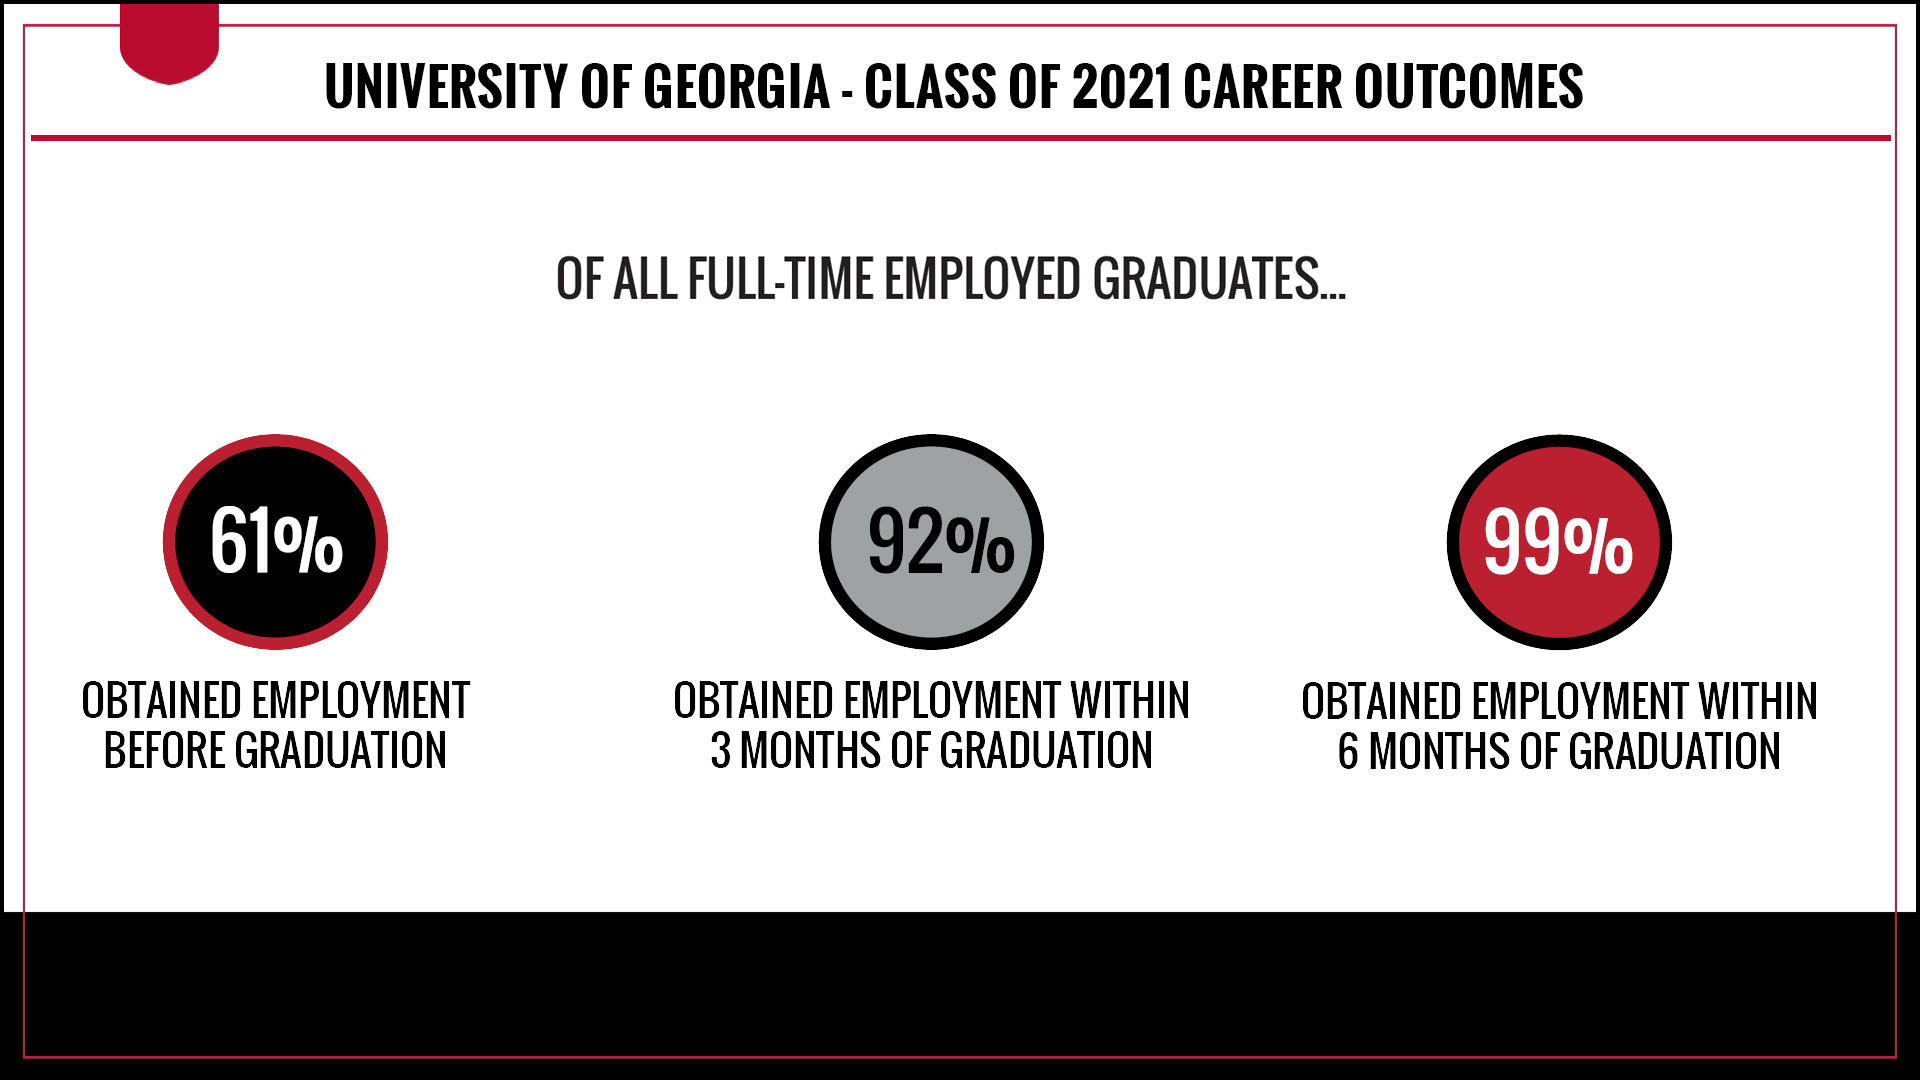 Of all full-time employed UGA Class of 2021 graduates, 61 percent obtained employment before graduation, 92 percent obtained employment within three months of graduation, and 99 percent obtained employment within six months of graduation